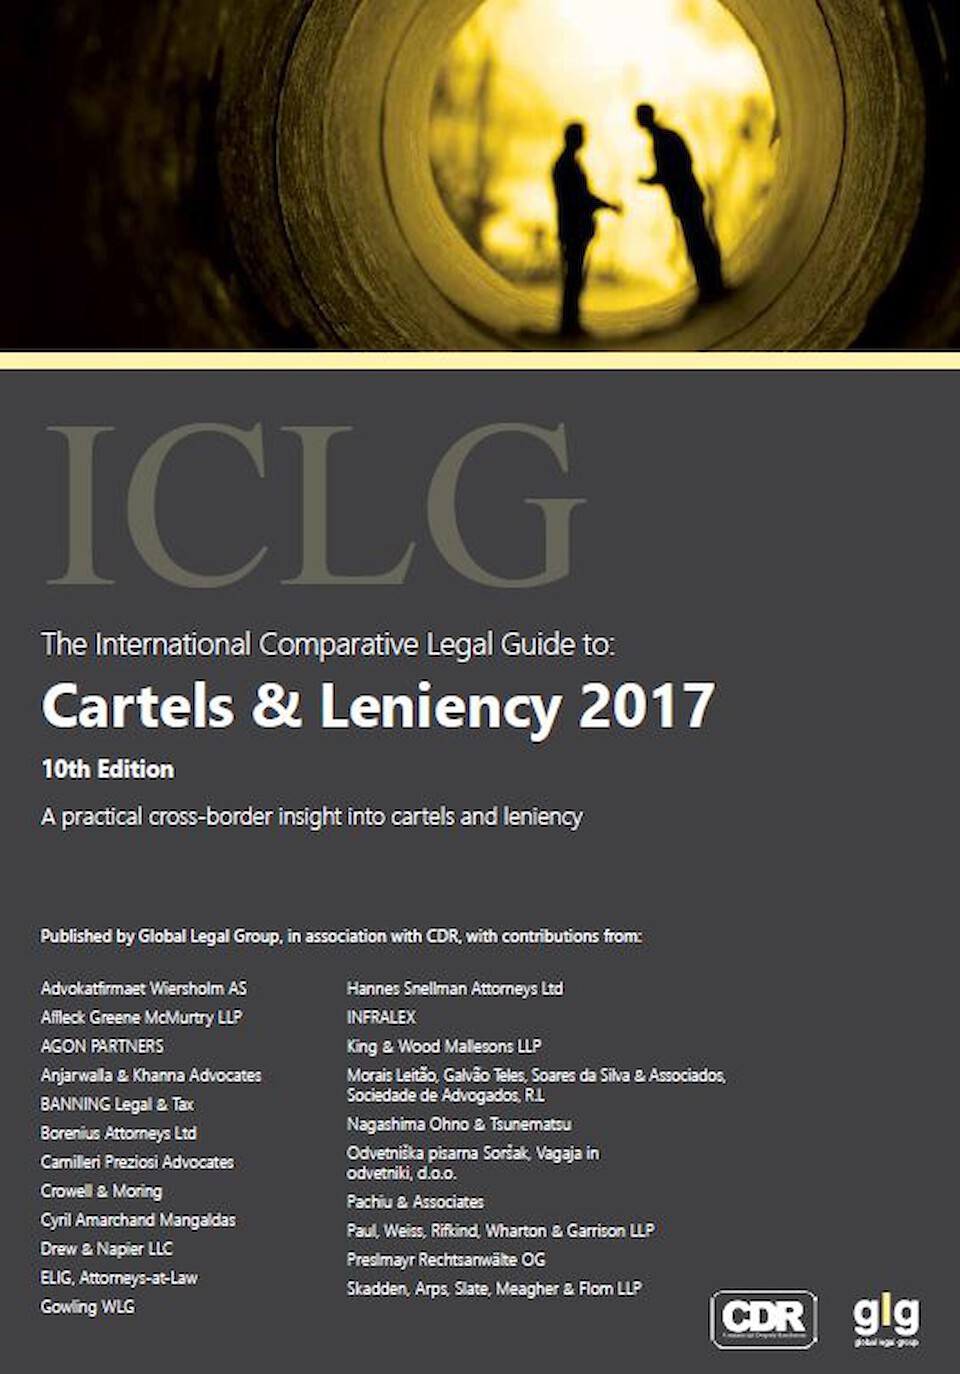 The International Comparative Legal Guide to: Cartels & Leniency 2017